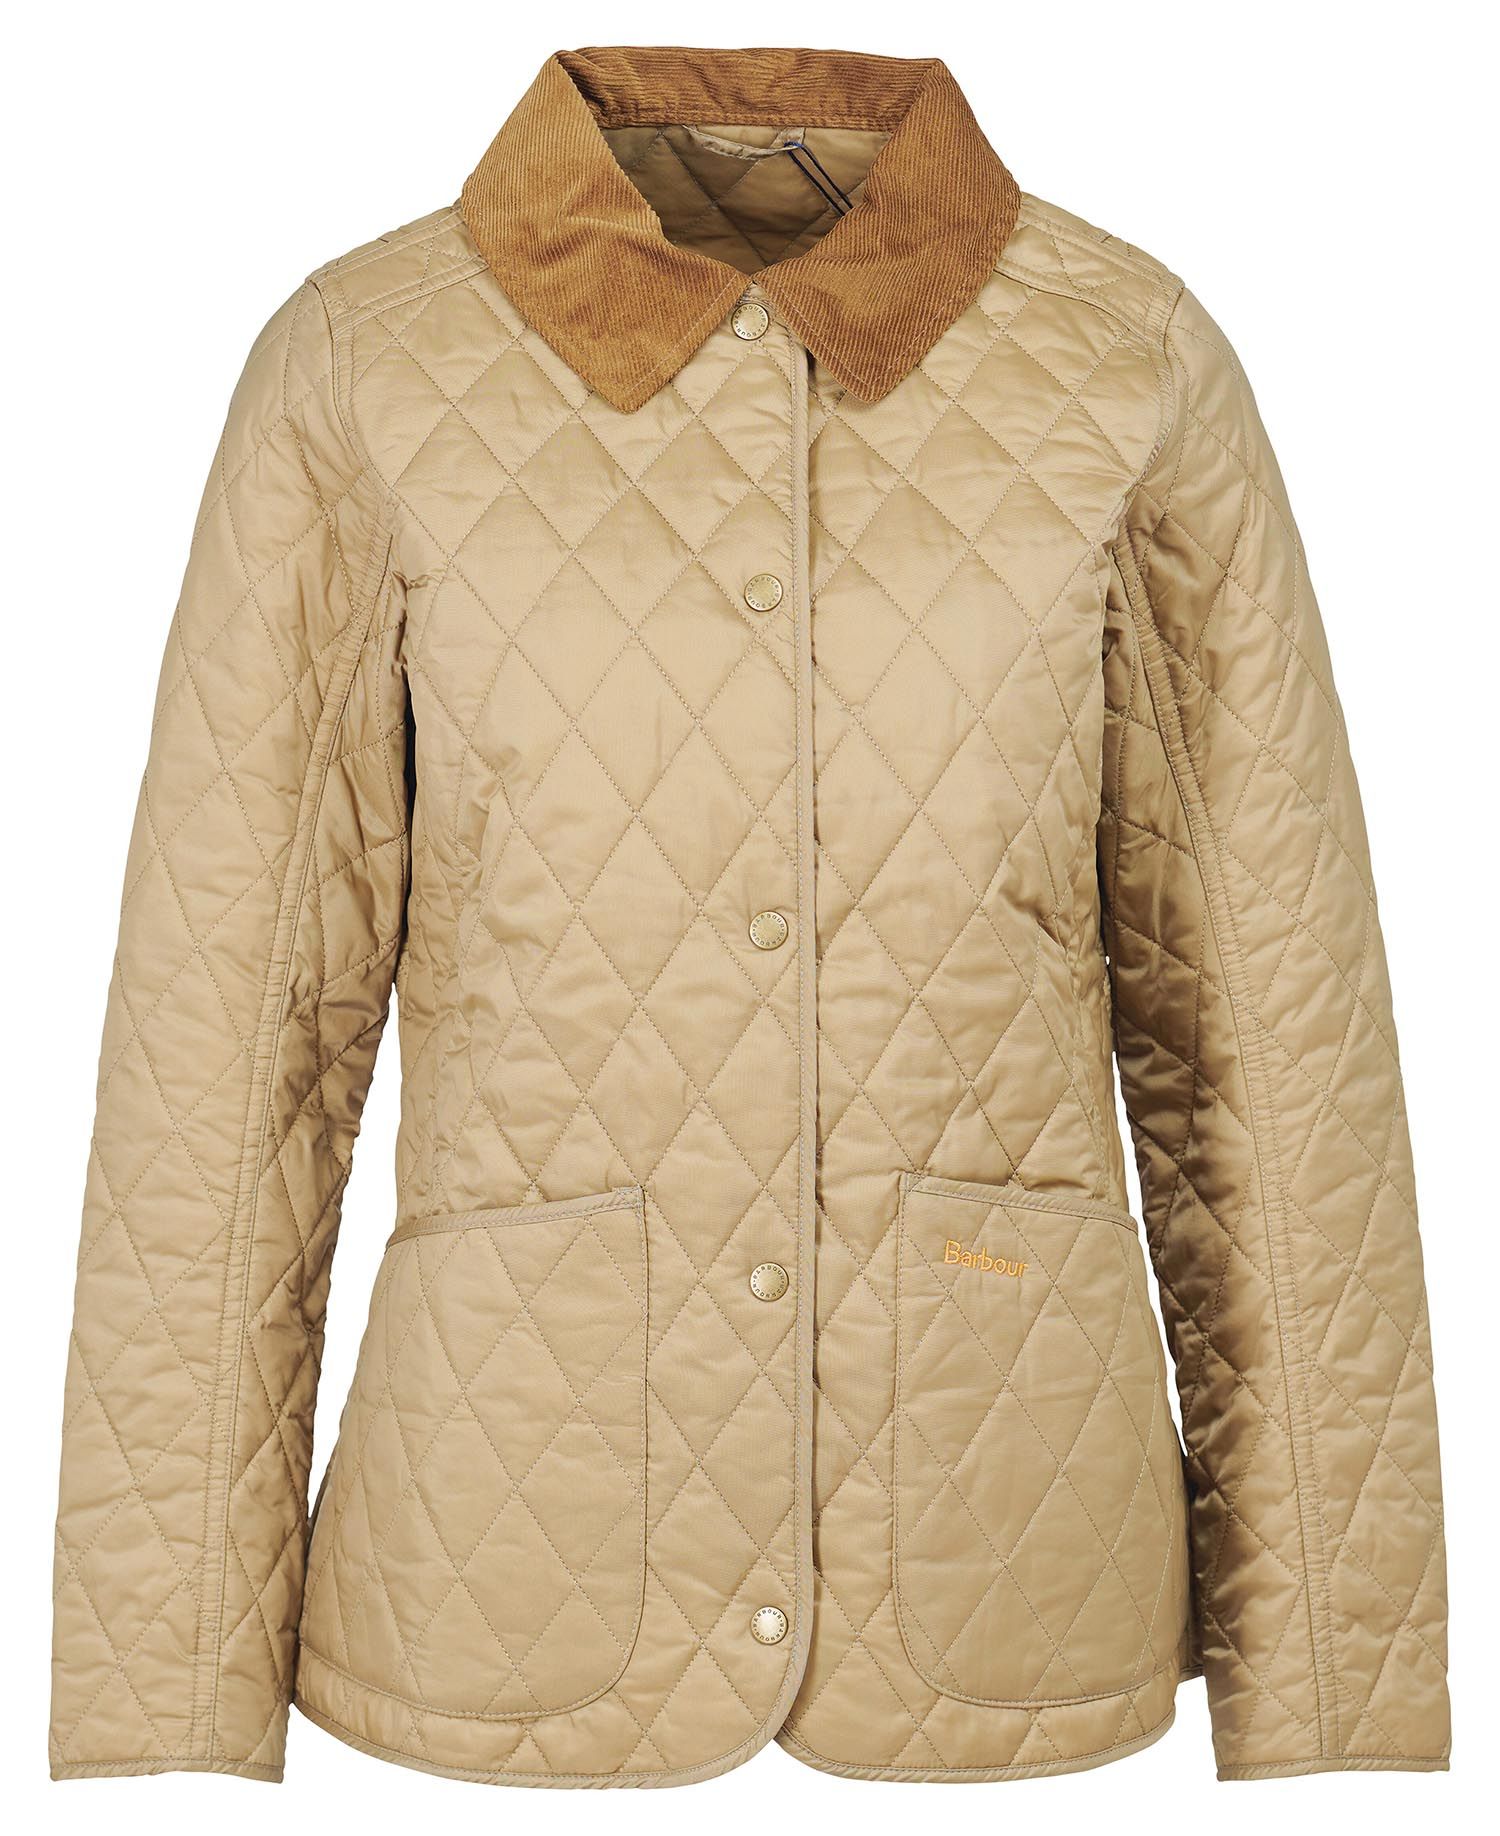 Shop the Babour Annandale Quilted Jacket today. | Barbour